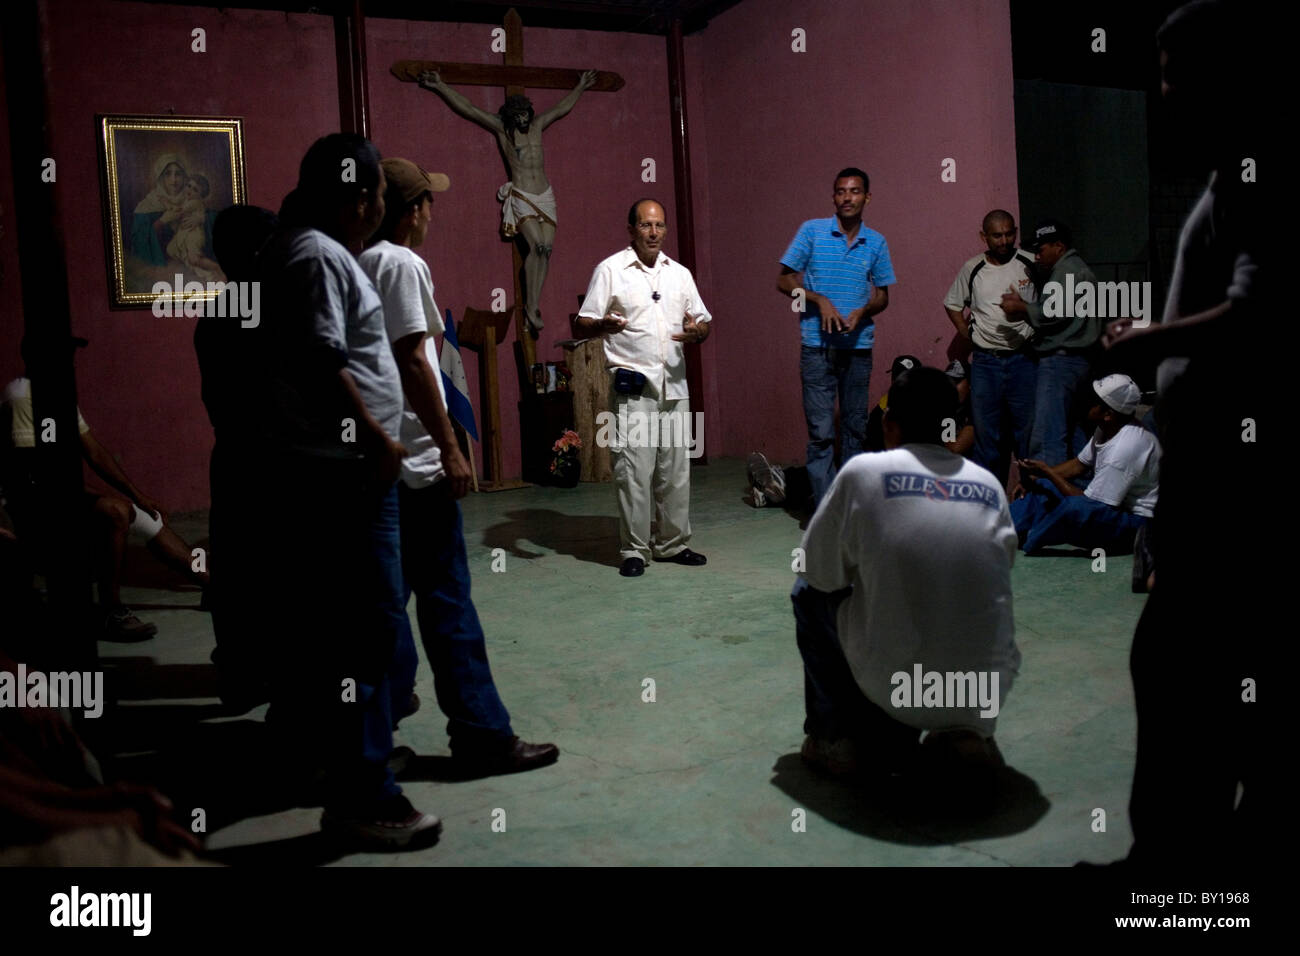 Catholic priest Alejandro Solalinde meets with immigrants at his shelter for migrants in Ixtepec, Oaxaca State, Mexico. Stock Photo